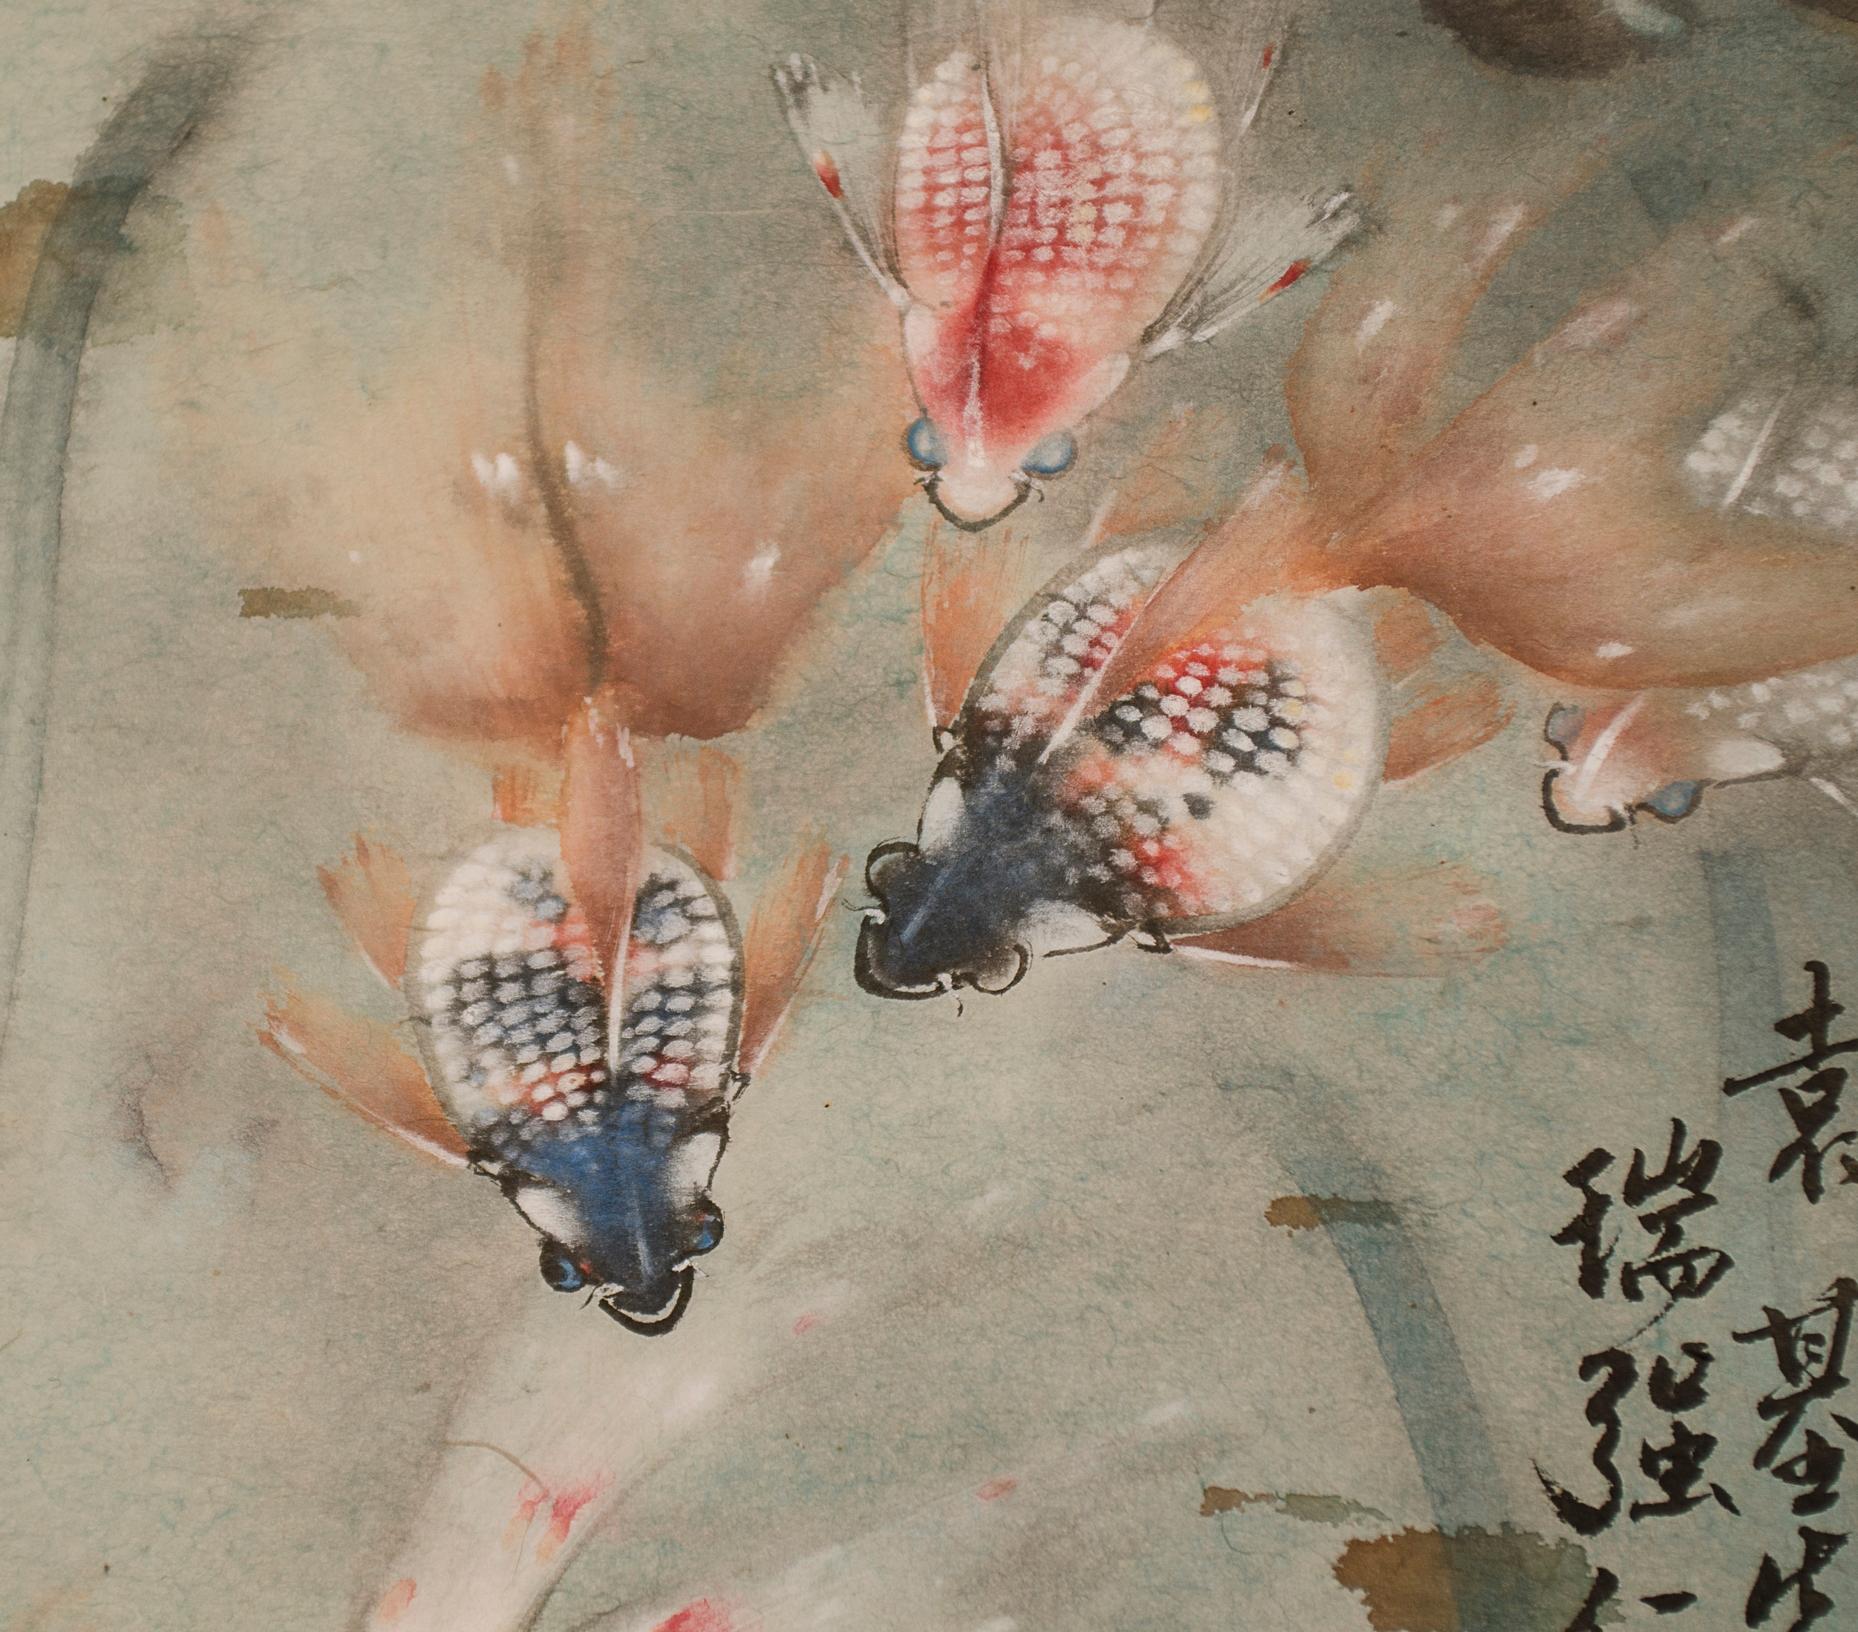 Chinese watercolor painted on paper
20th century painting with small wet spot.